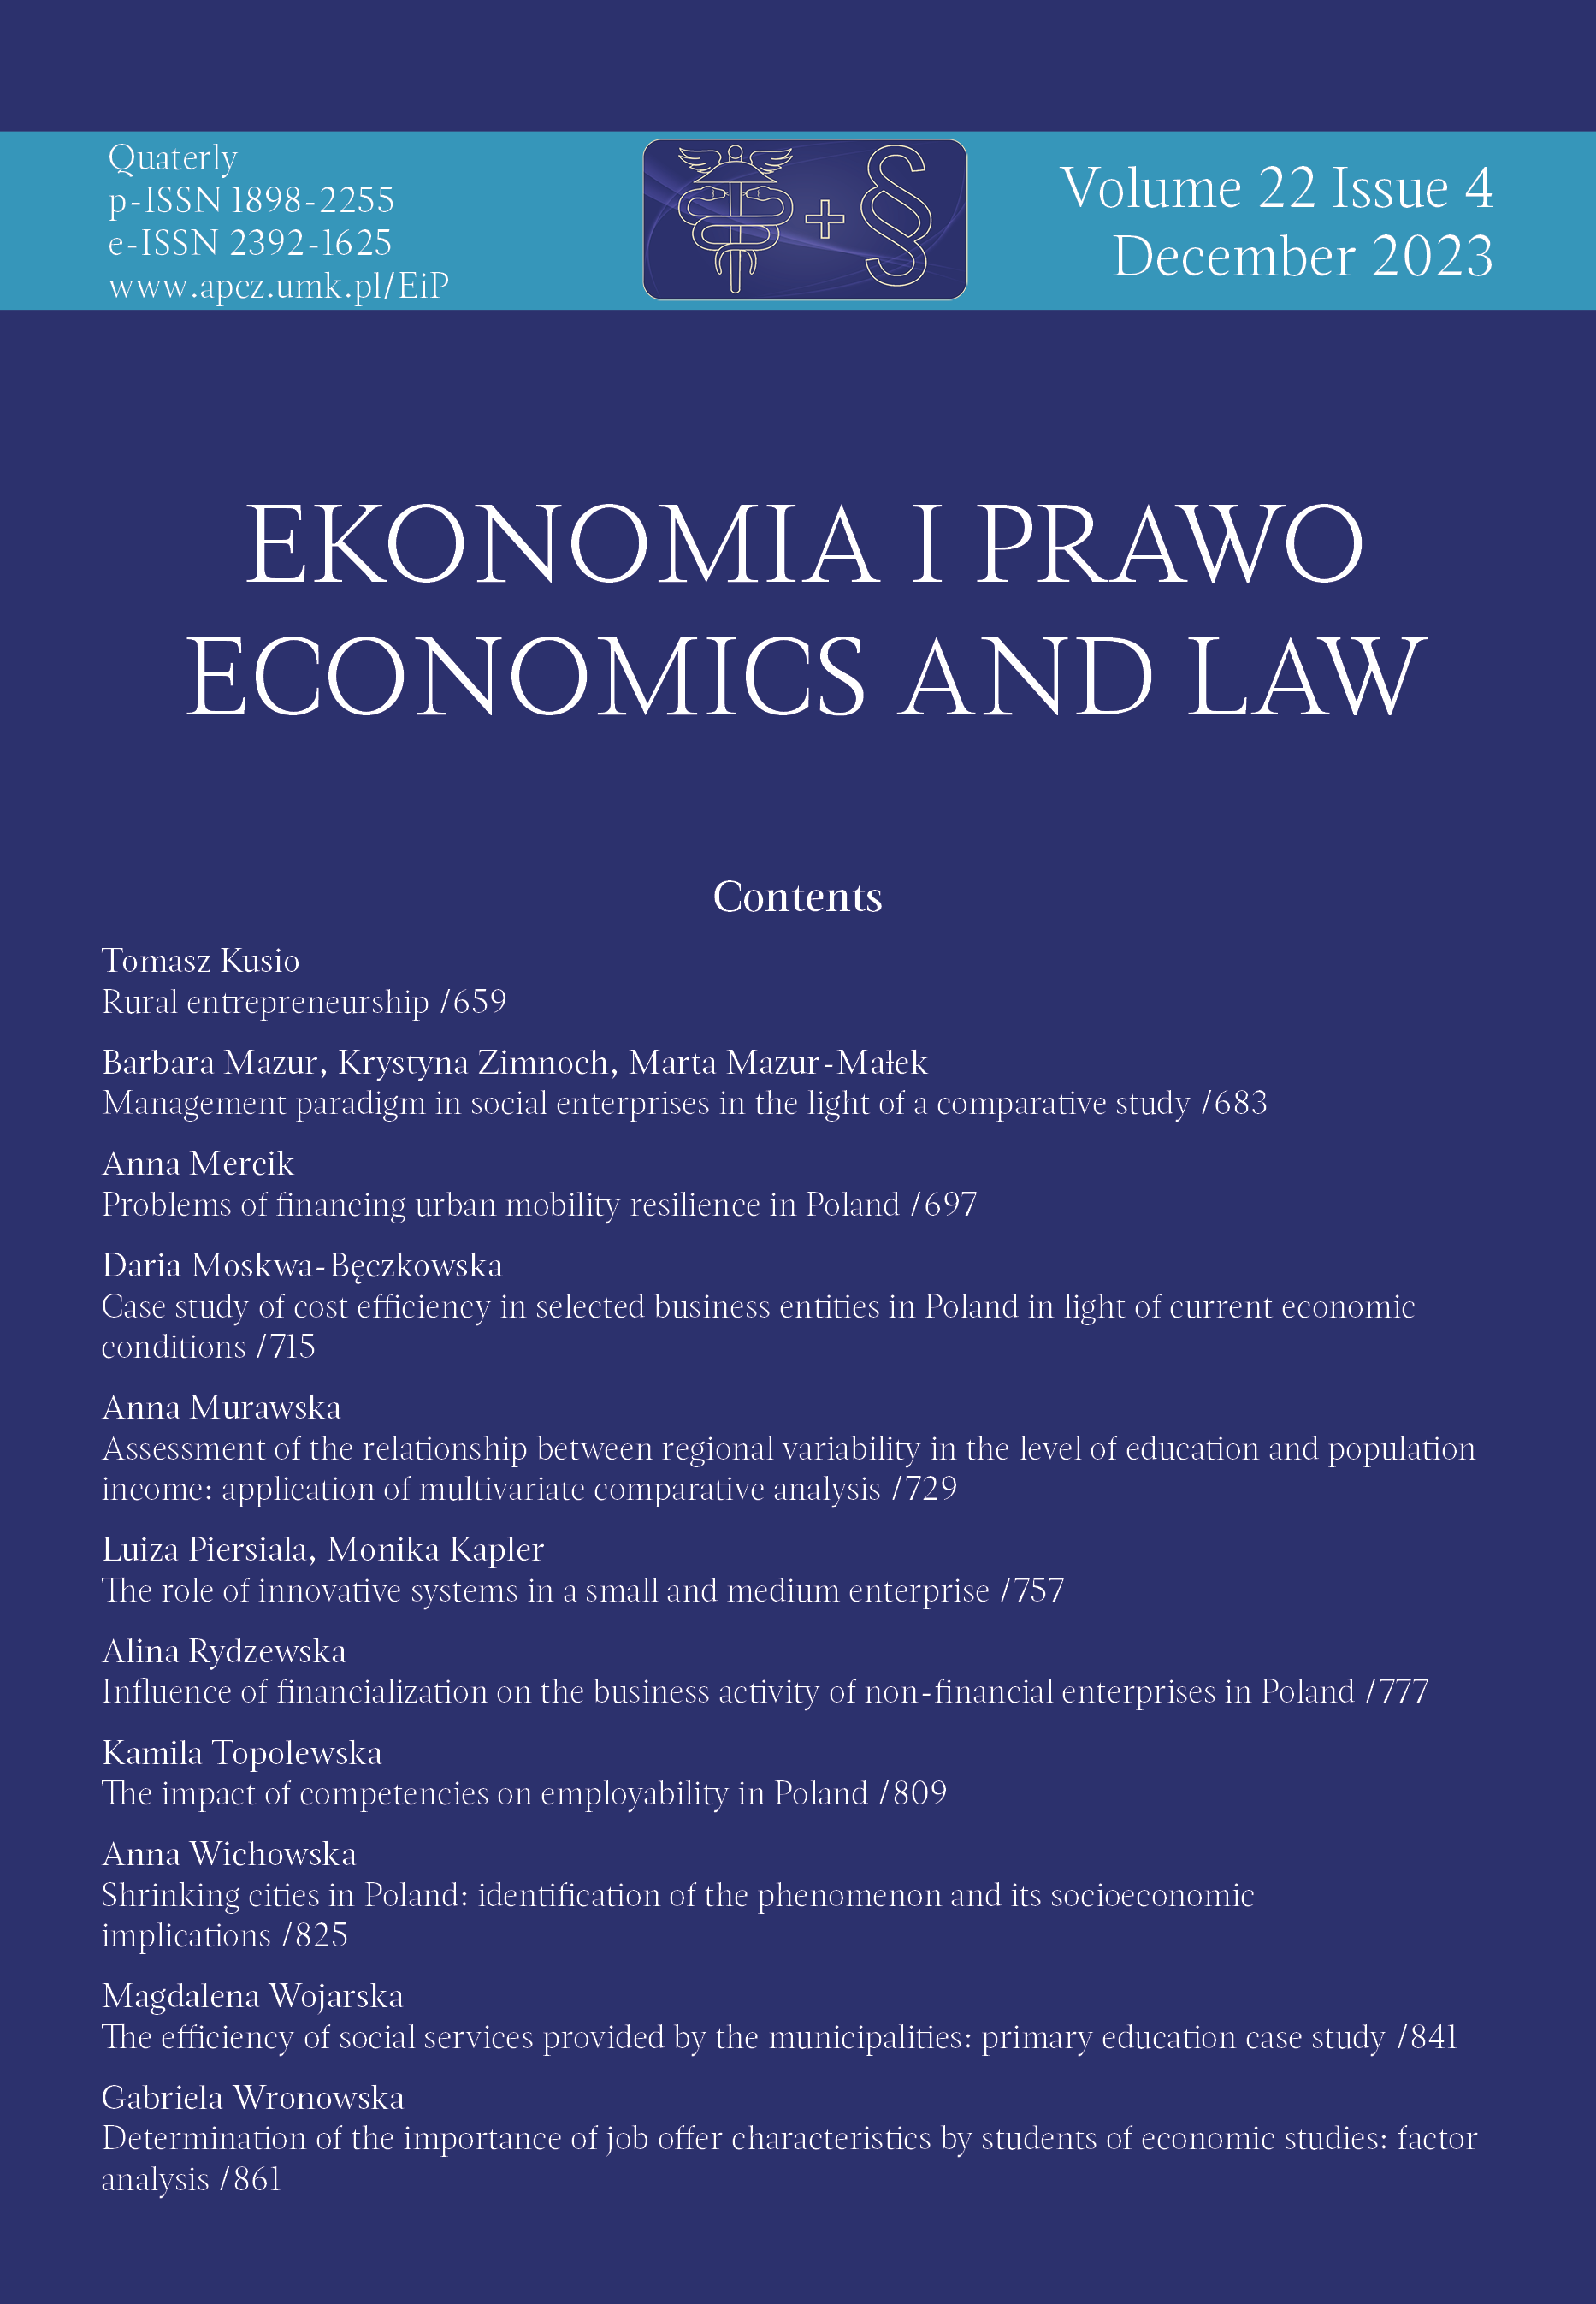 Shrinking cities in Poland: identification
of the phenomenon and its
socioeconomic implications